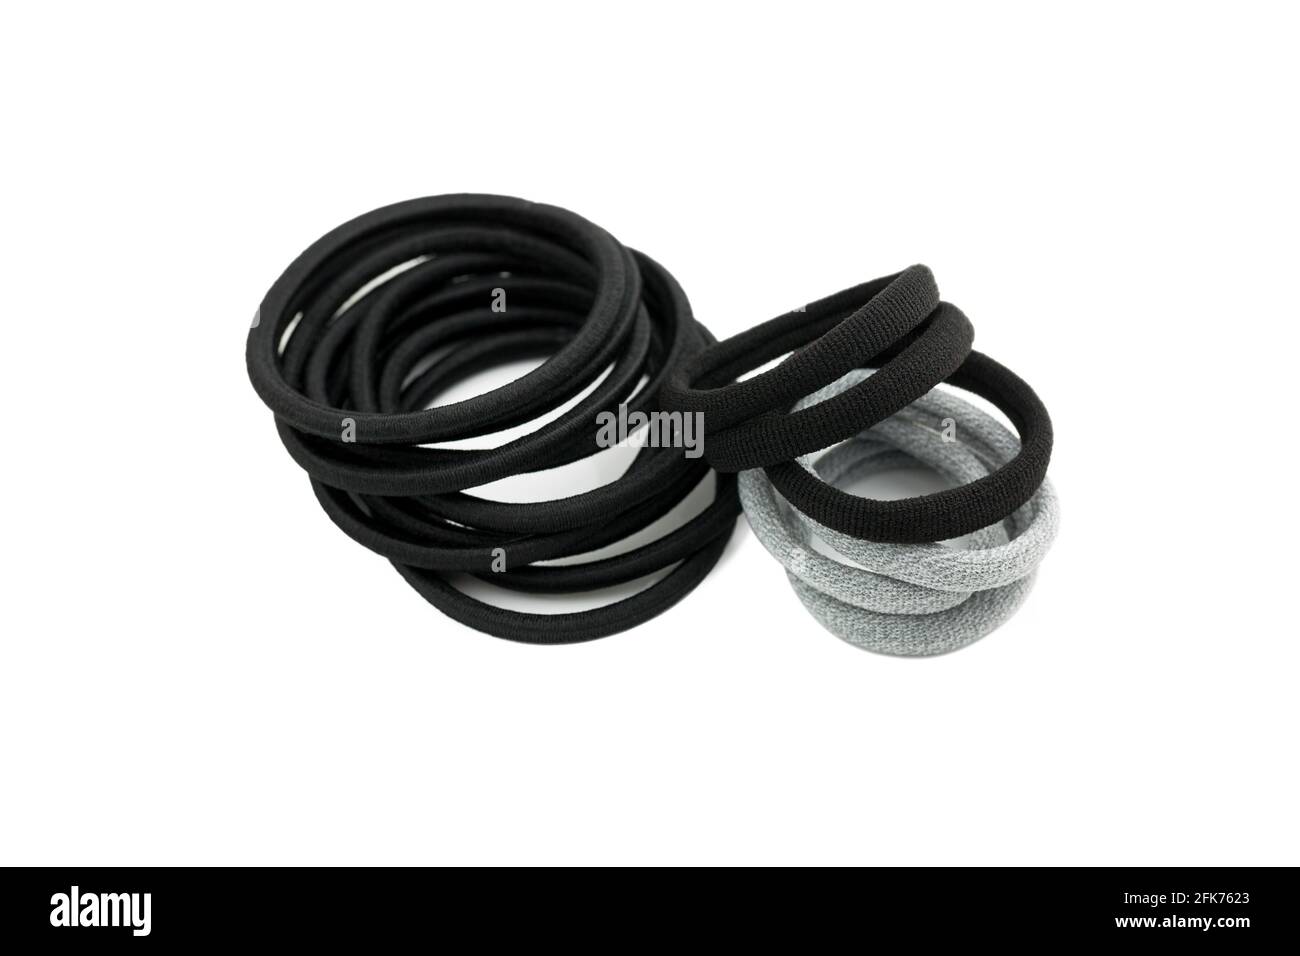 Pieces of hair elastics to tie hair. Rubber head dressing in Black Grey on white background Stock Photo